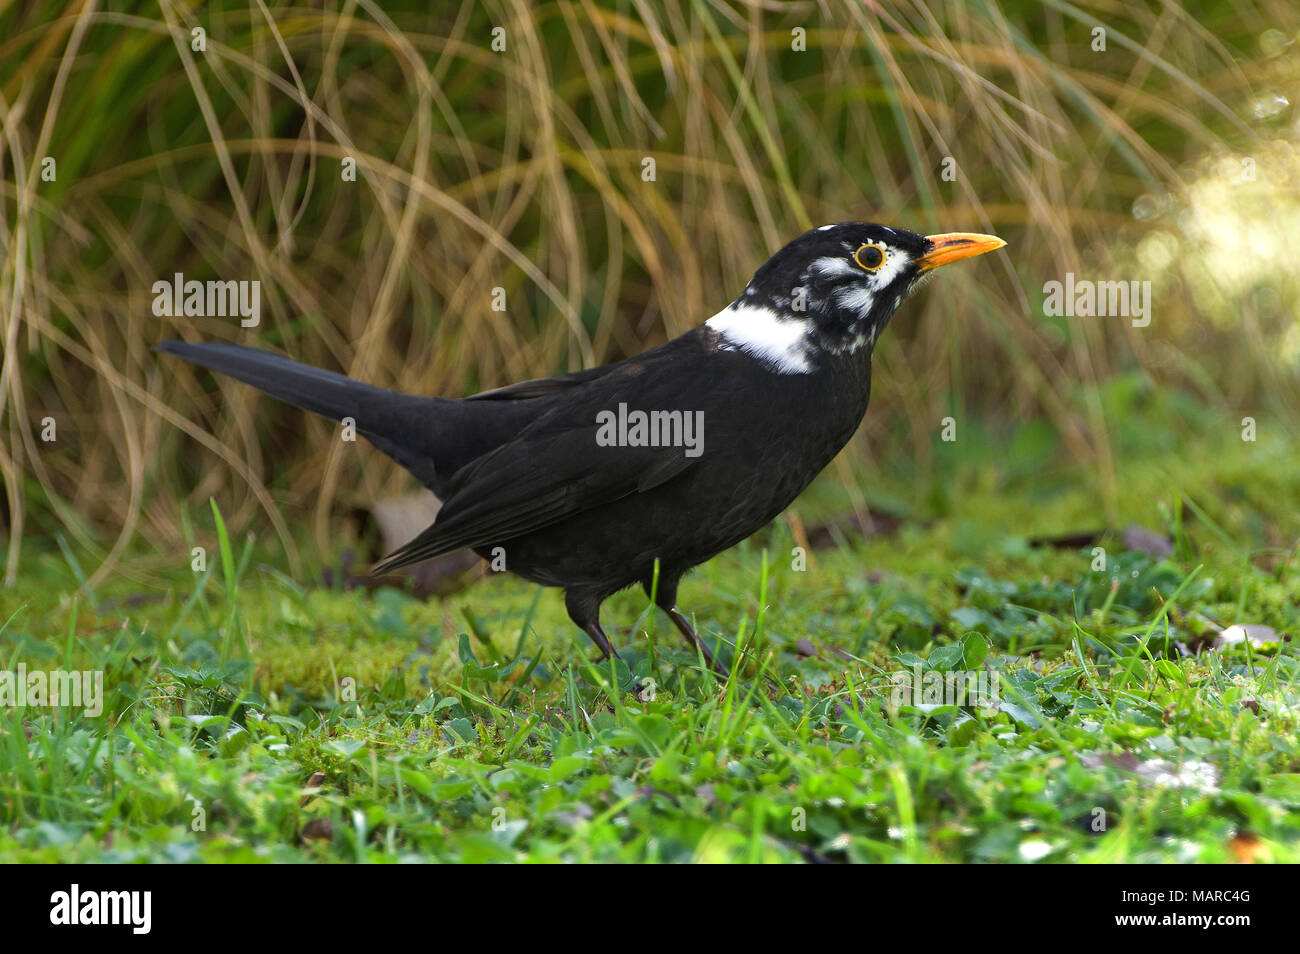 Blackbird (Turdus merula) Male with white feathers in a garden. Germany Stock Photo